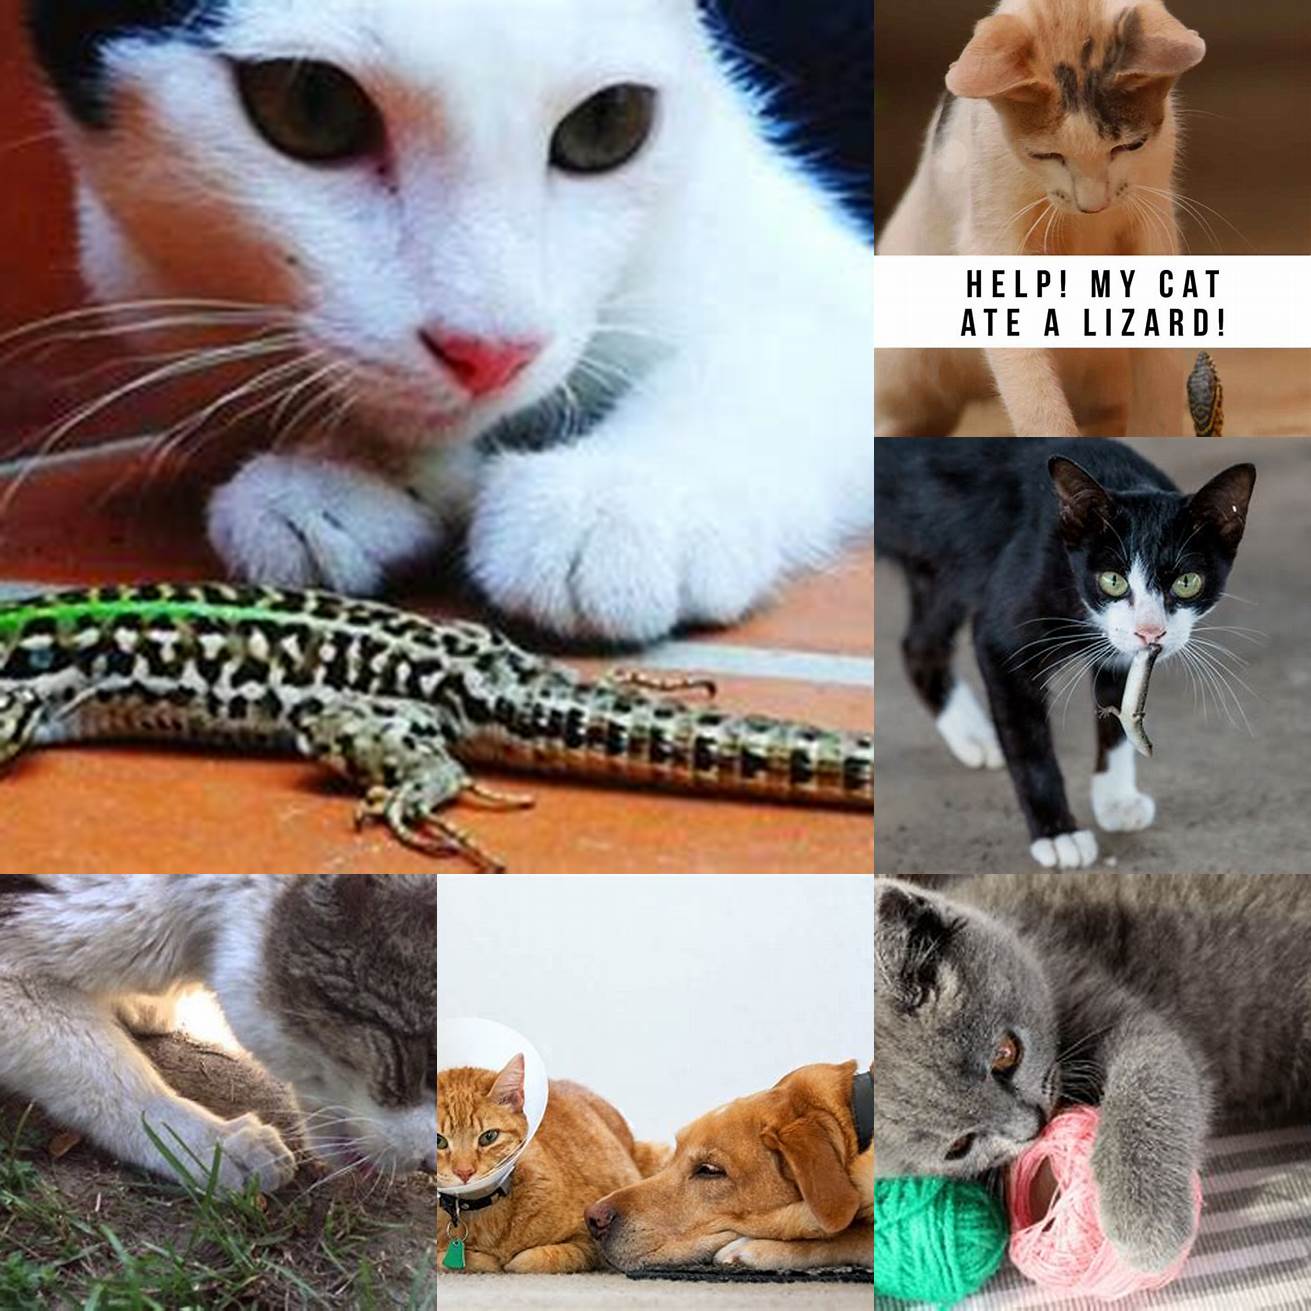 5 Seek veterinary care if your cat has ingested a lizard